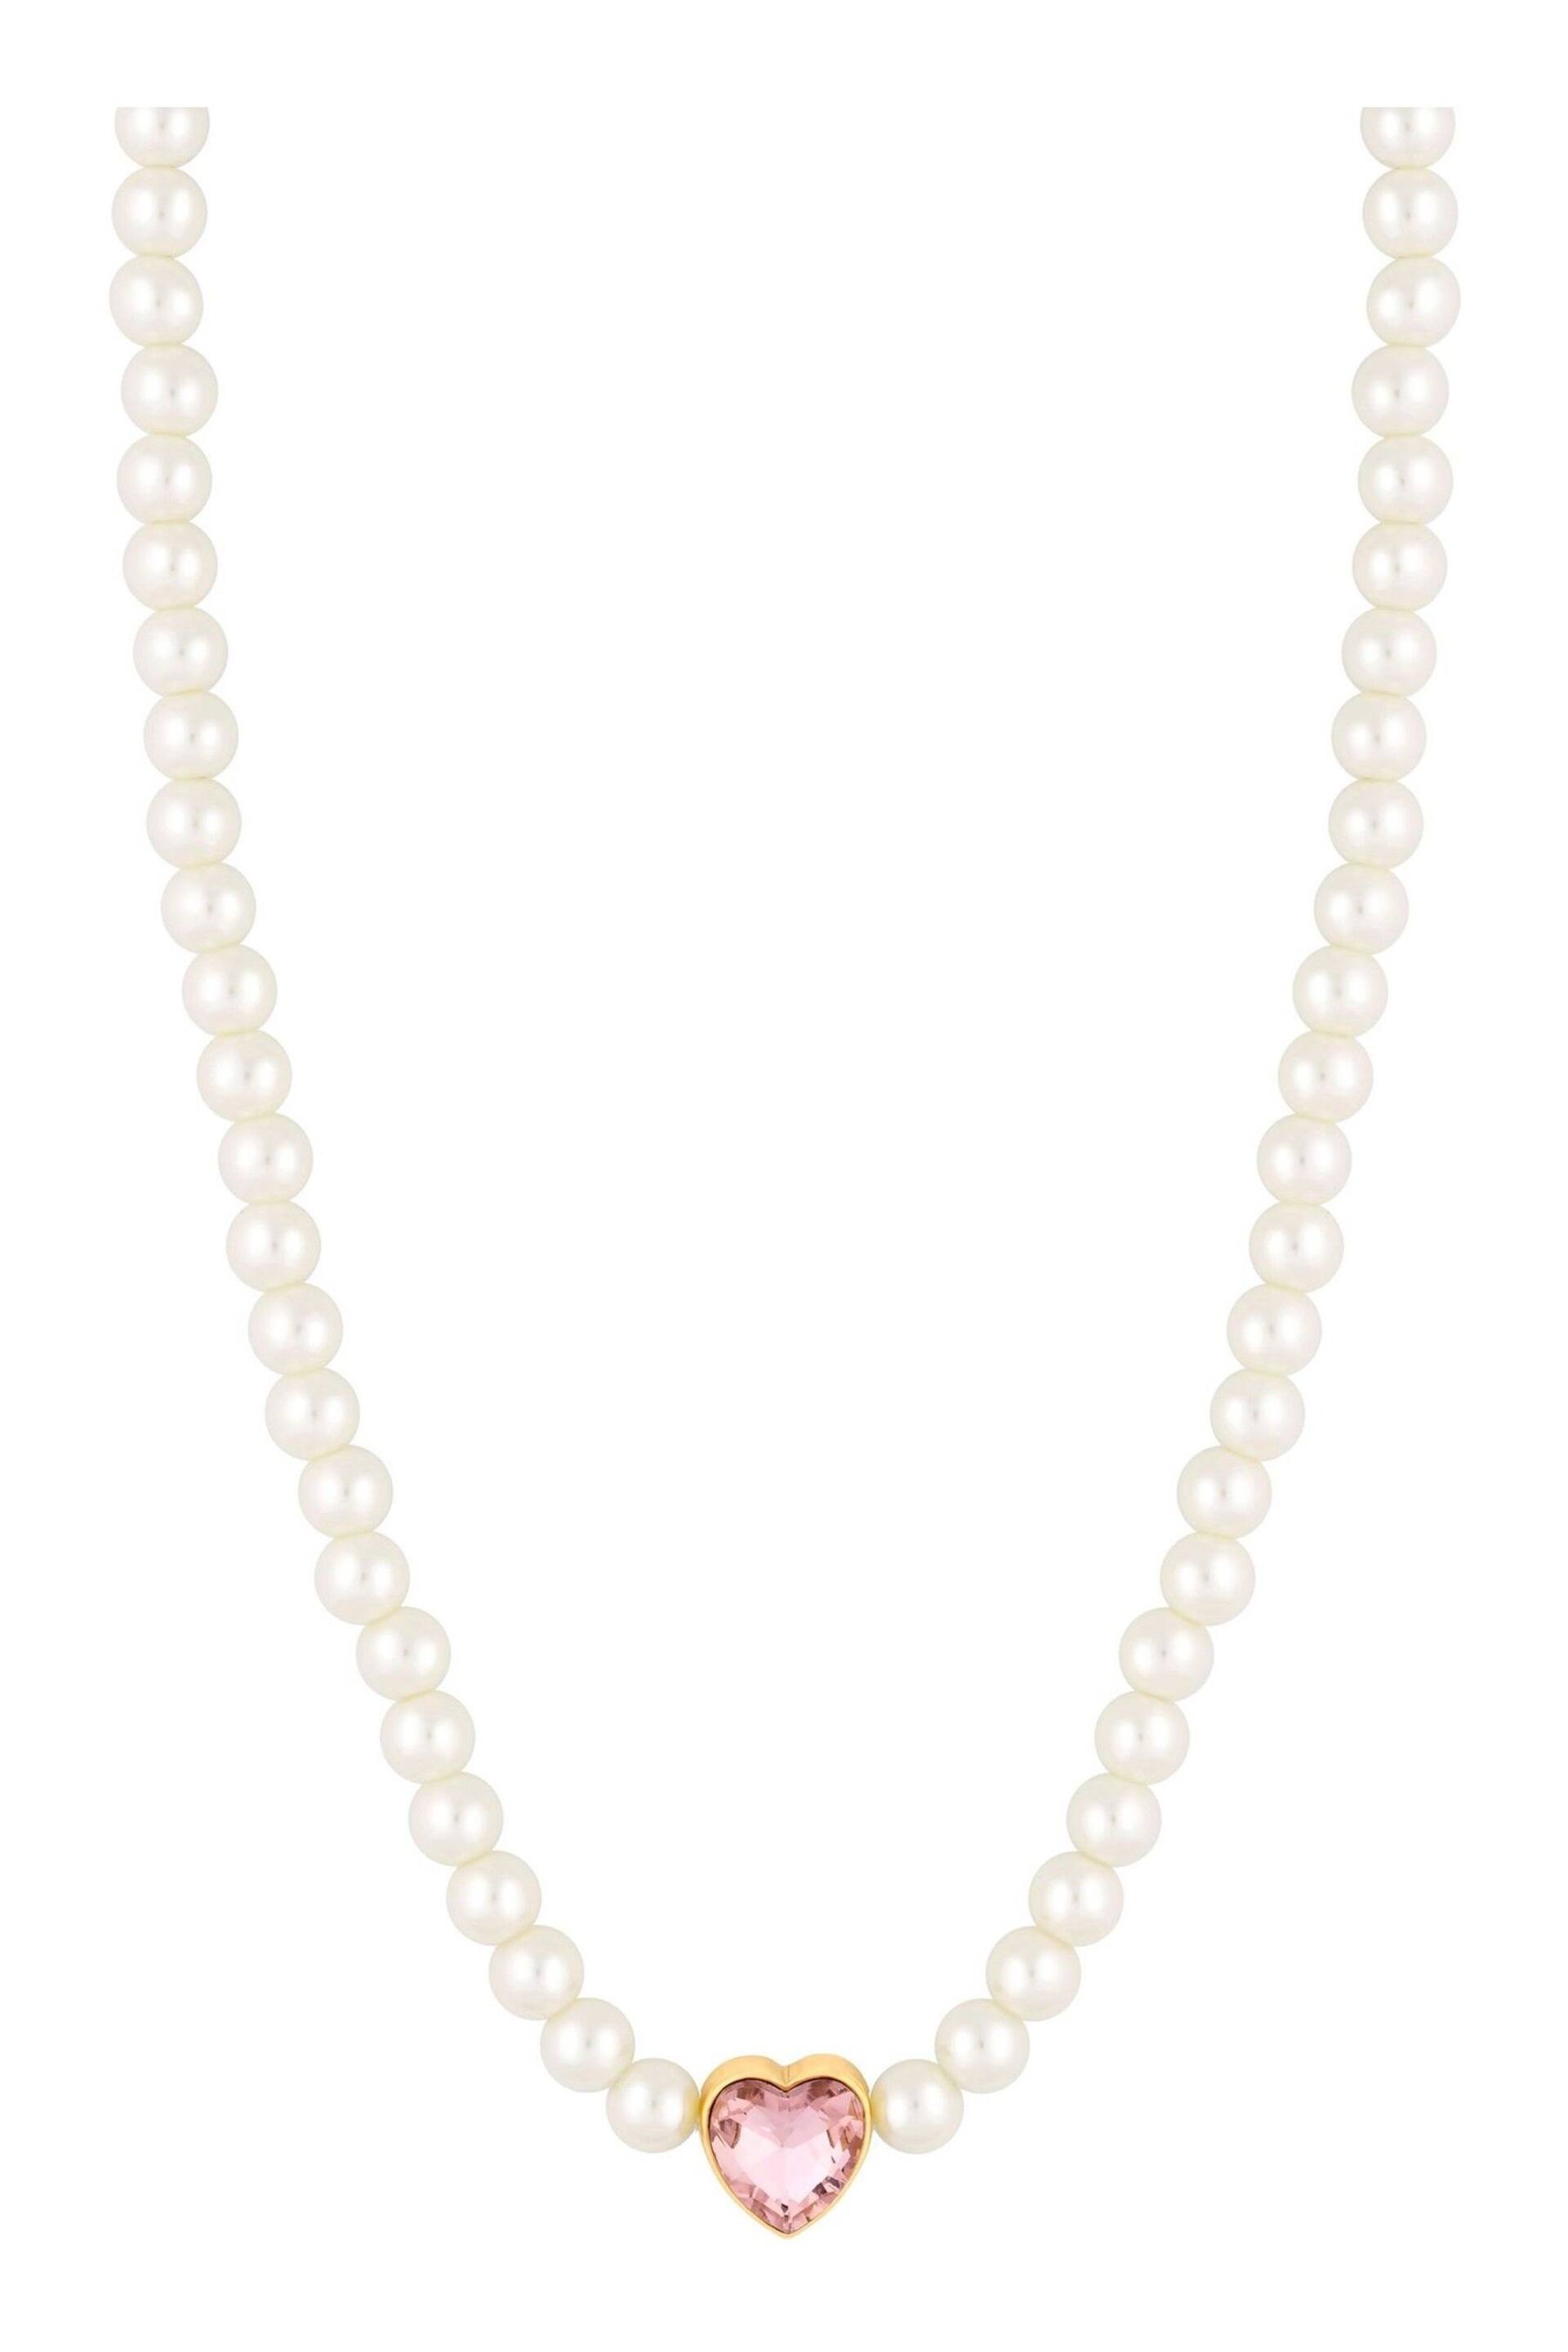 Lipsy Jewellery Gold Tone Pearl Heart Choker Gift Boxed Necklace - Image 3 of 4